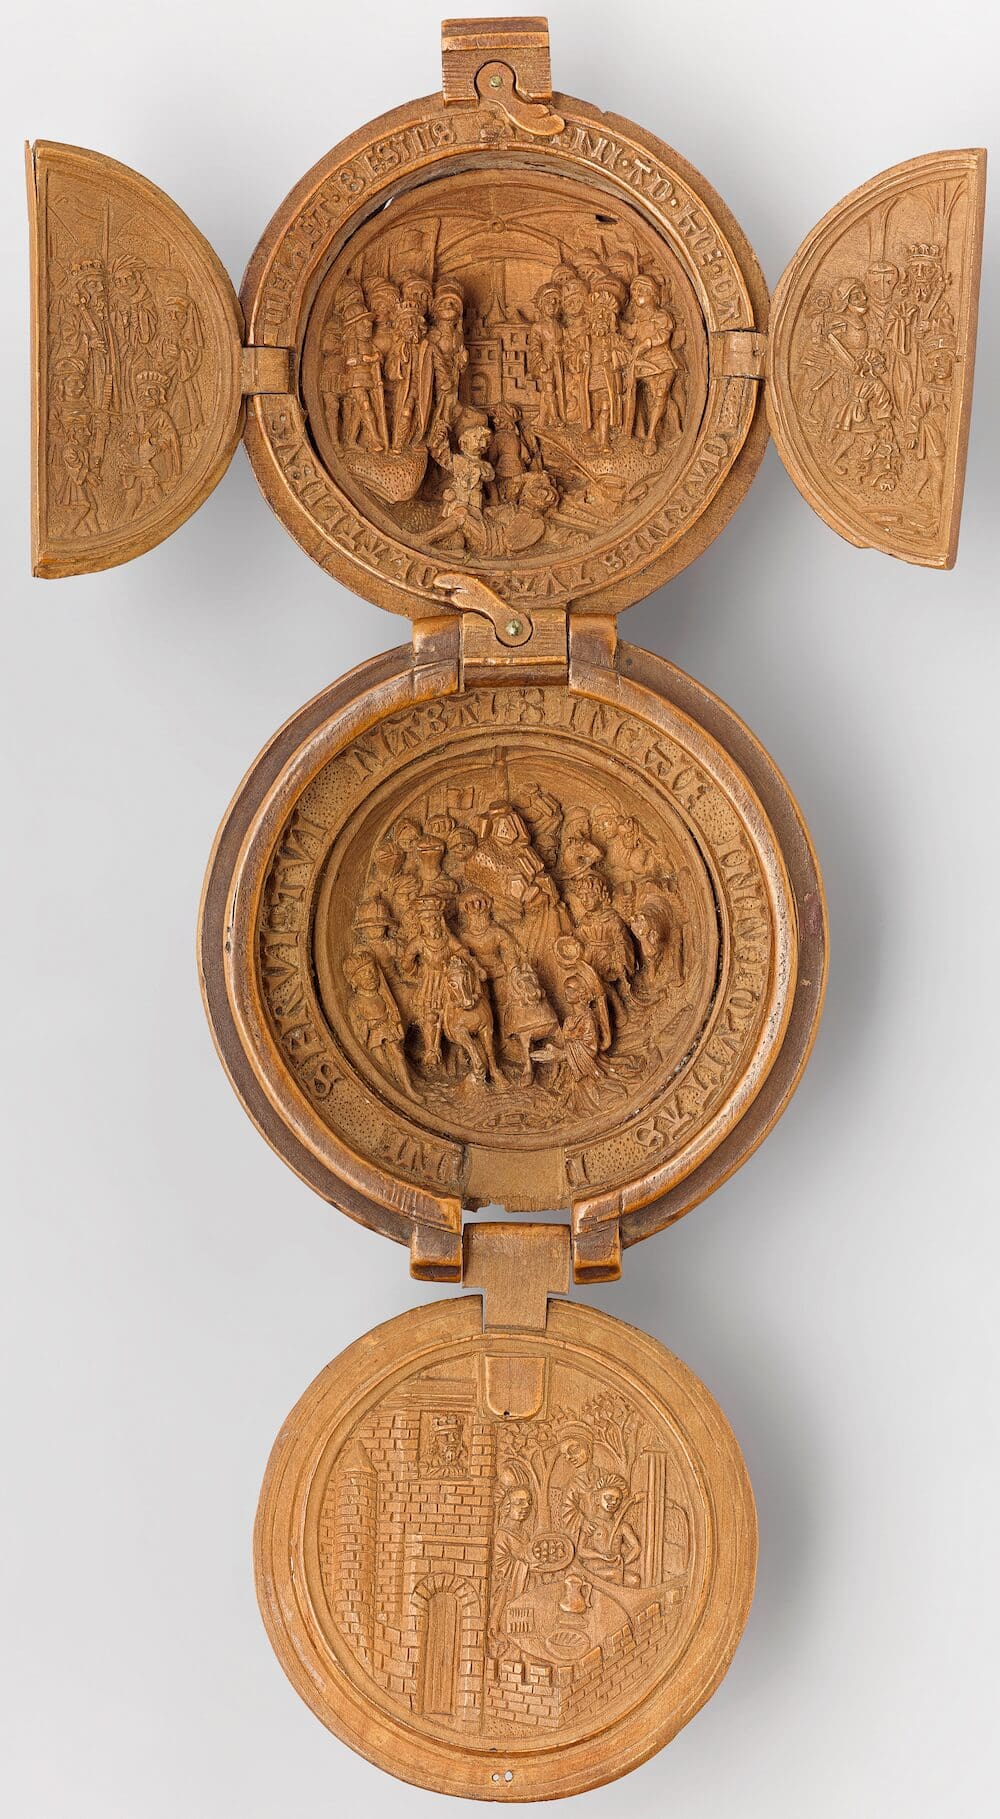 Beautifully Intricate Tiny Boxwood Carvings From The 16th Century (7)